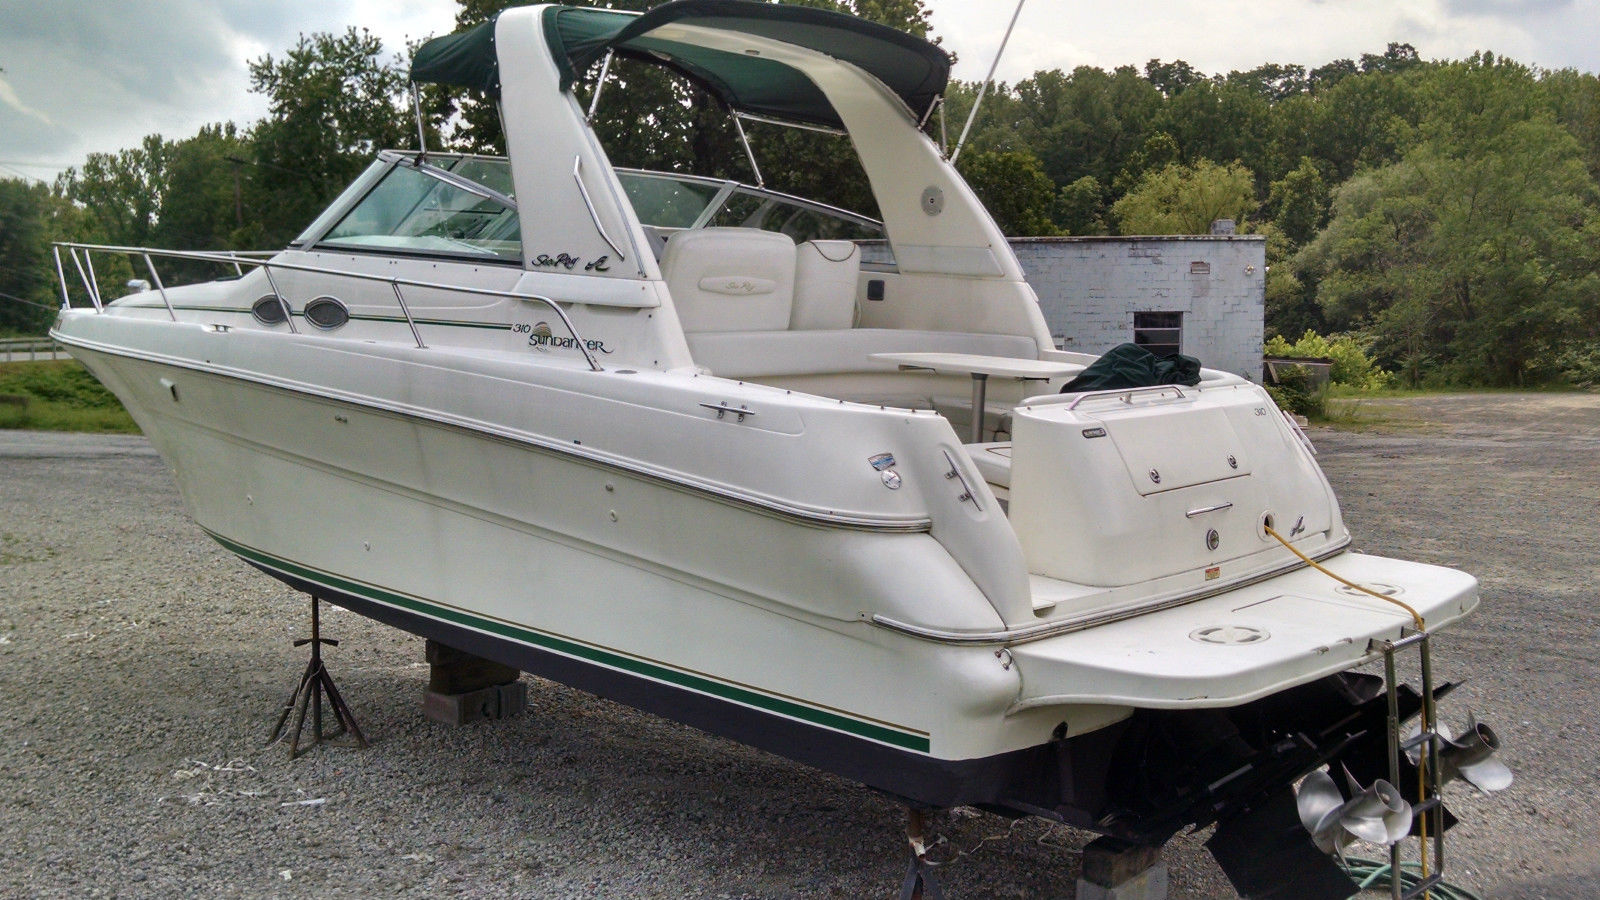 Sea Ray Sundancer 310 1999 for sale for $34,000 - Boats ...